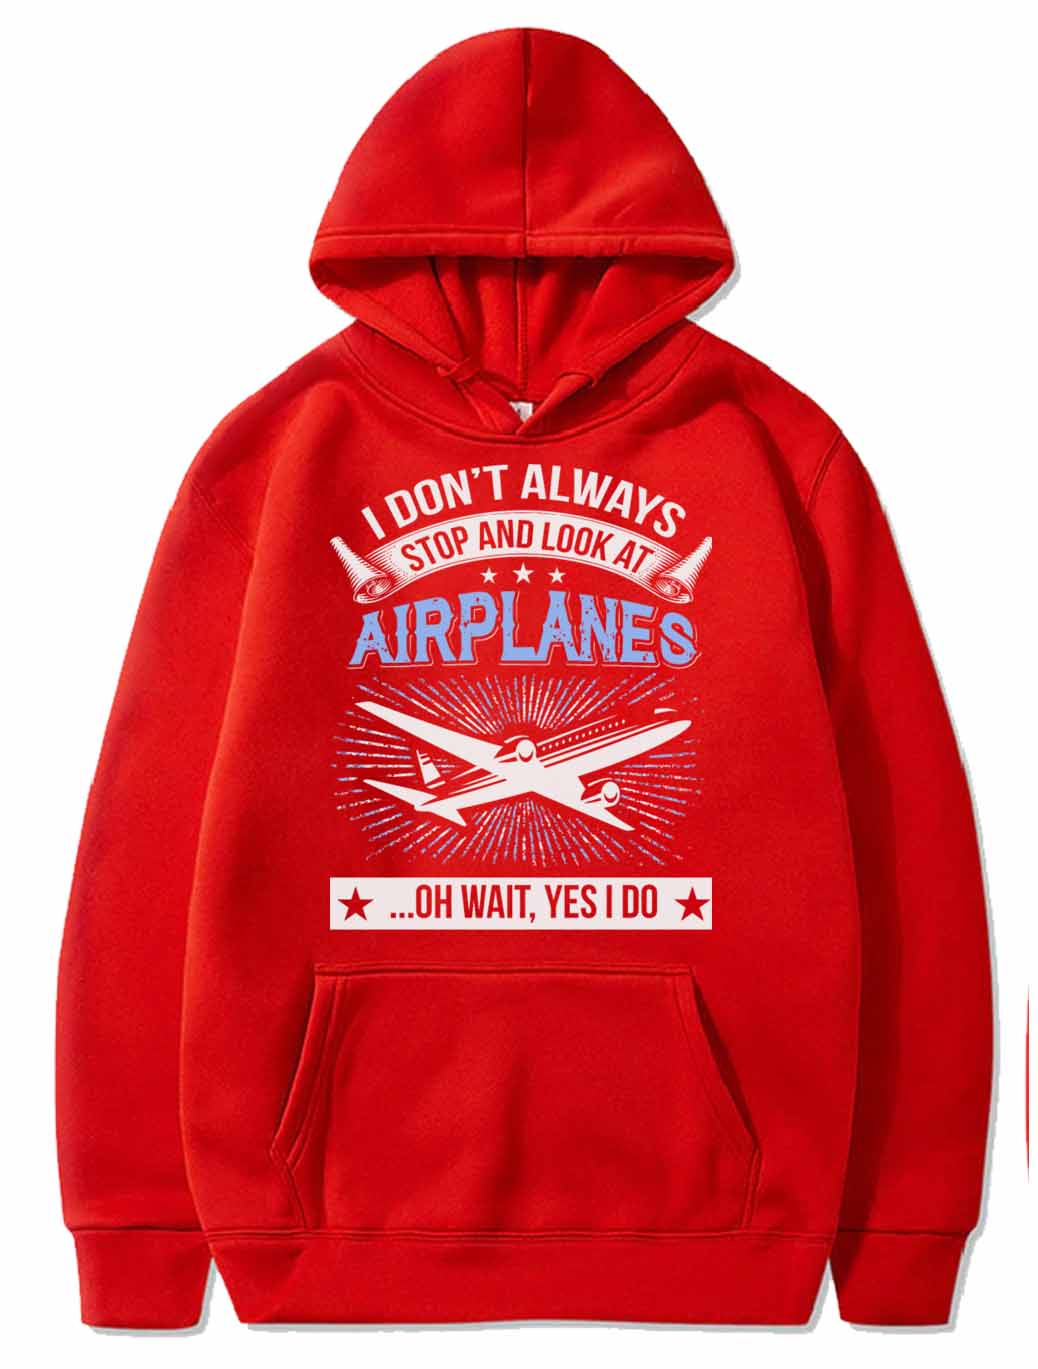 Airplane - Look At Airplanes PULLOVER THE AV8R